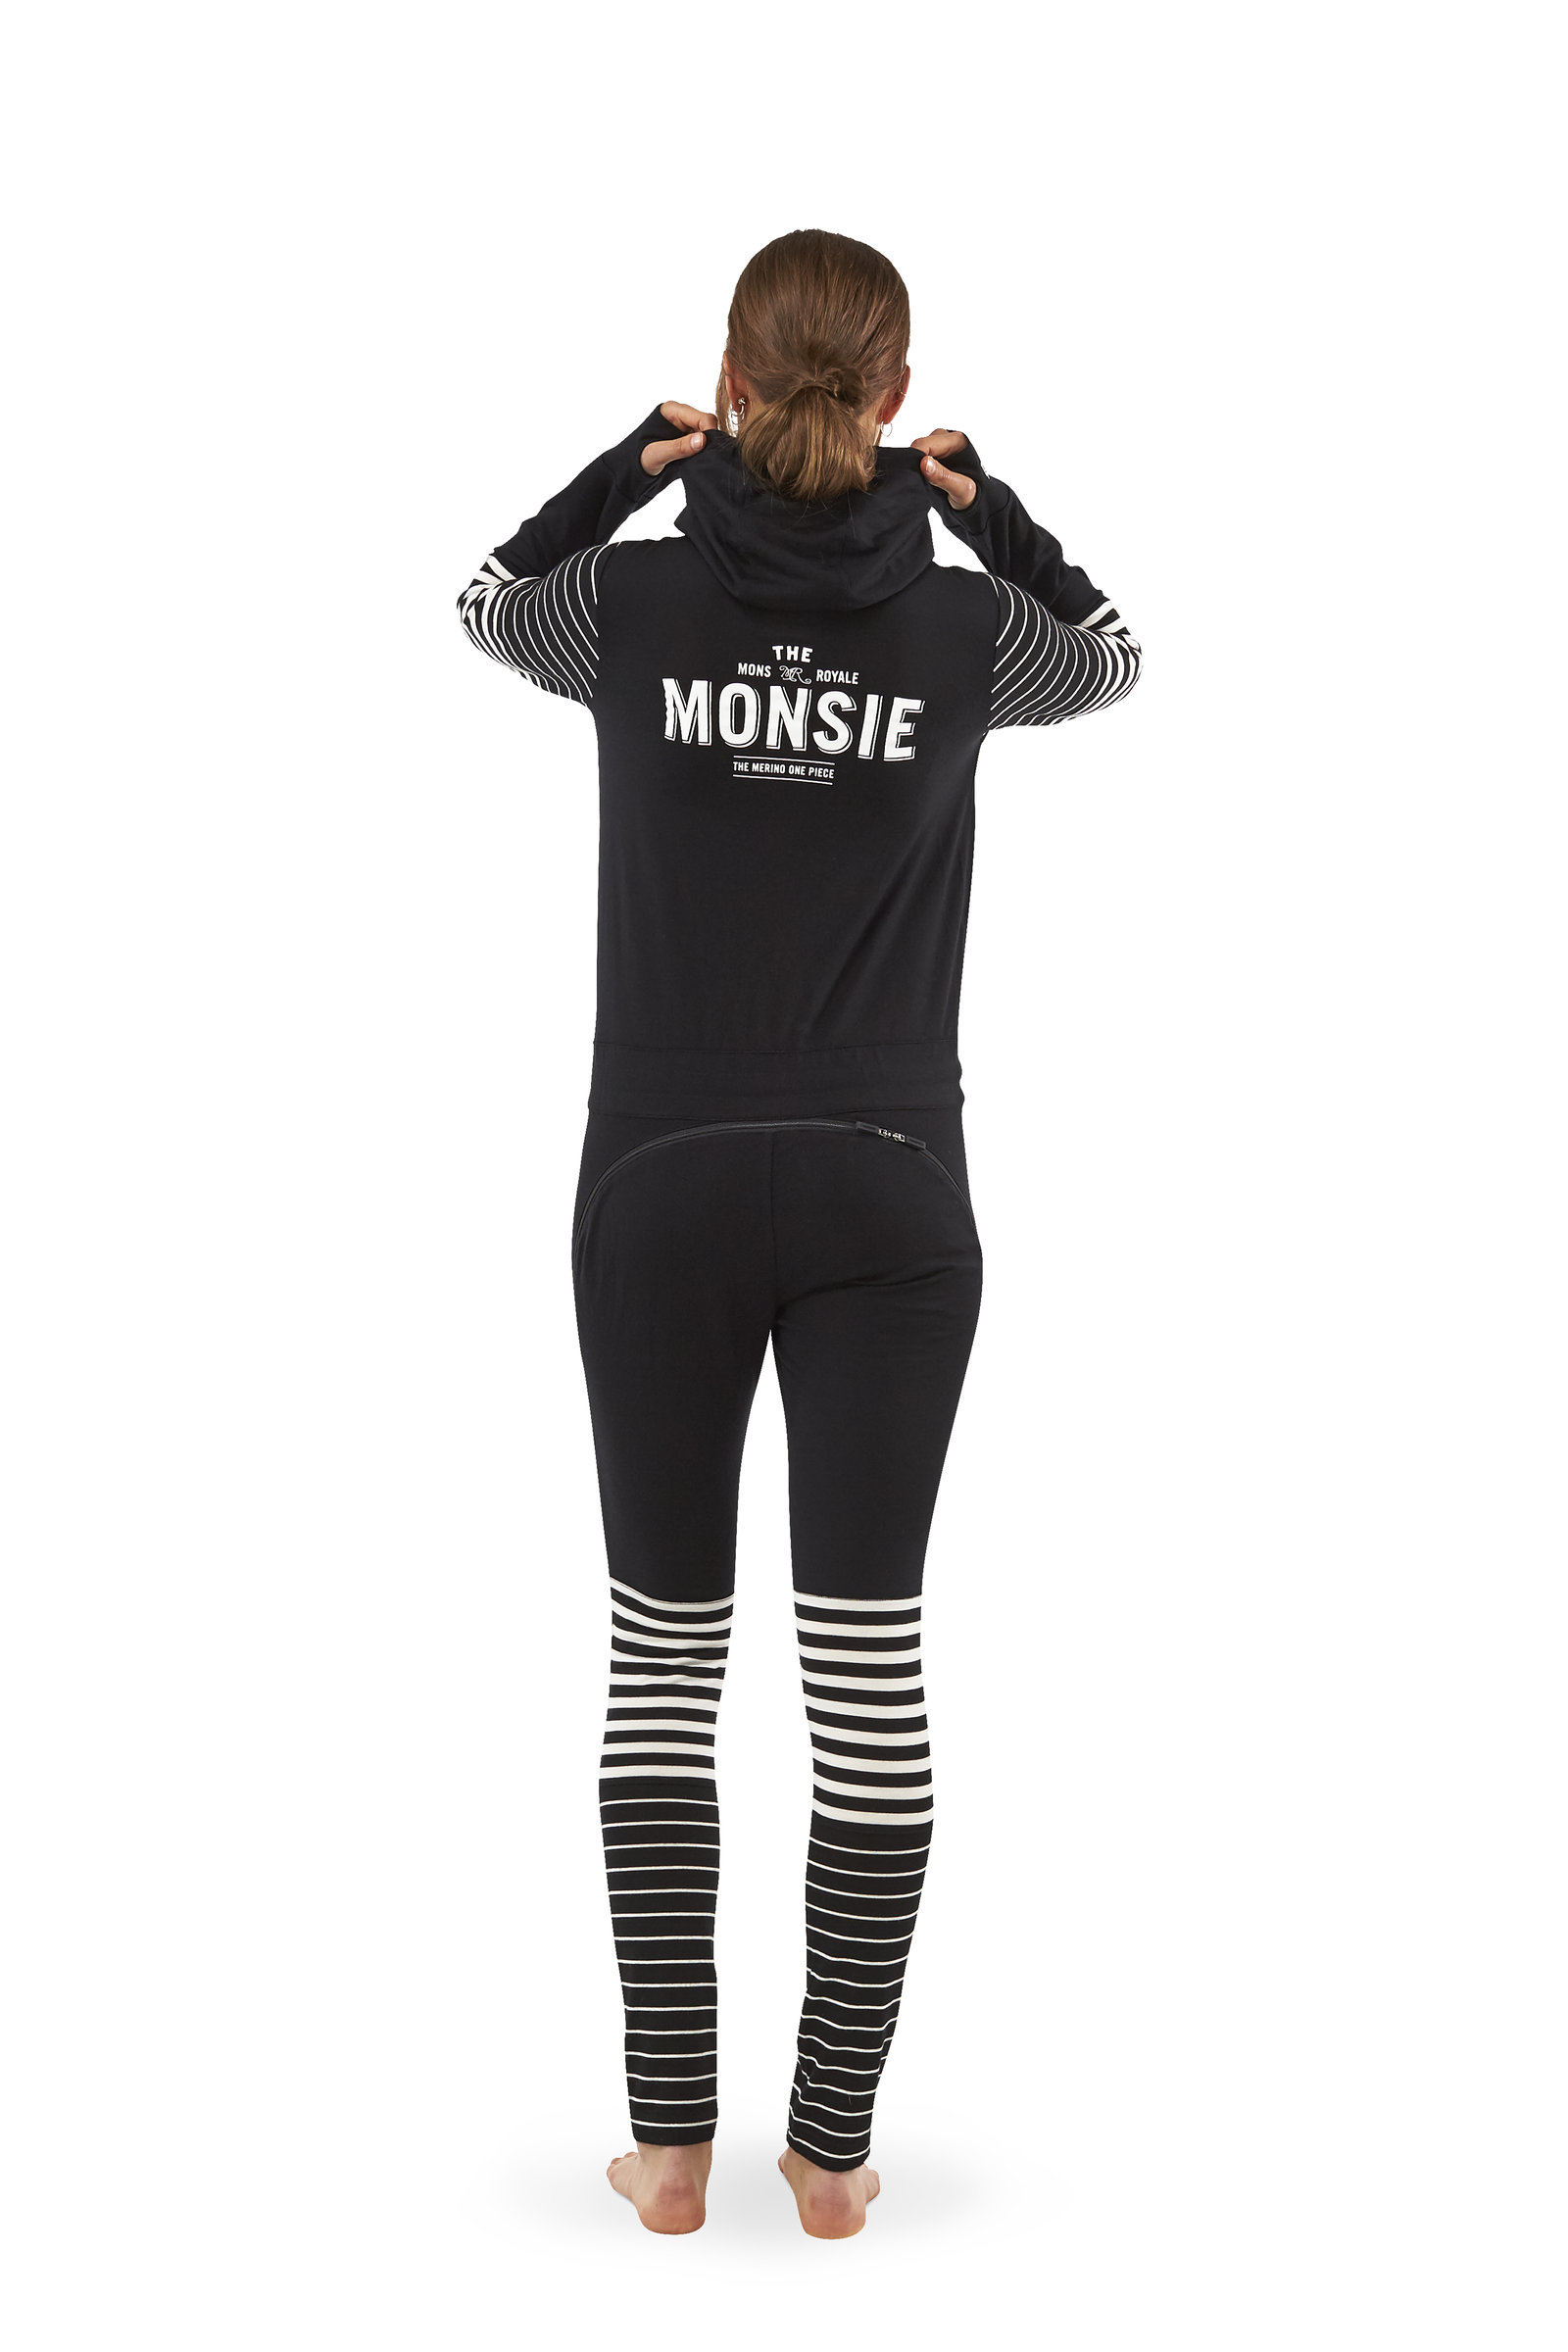 Mons Royale The Monsie One Piece 